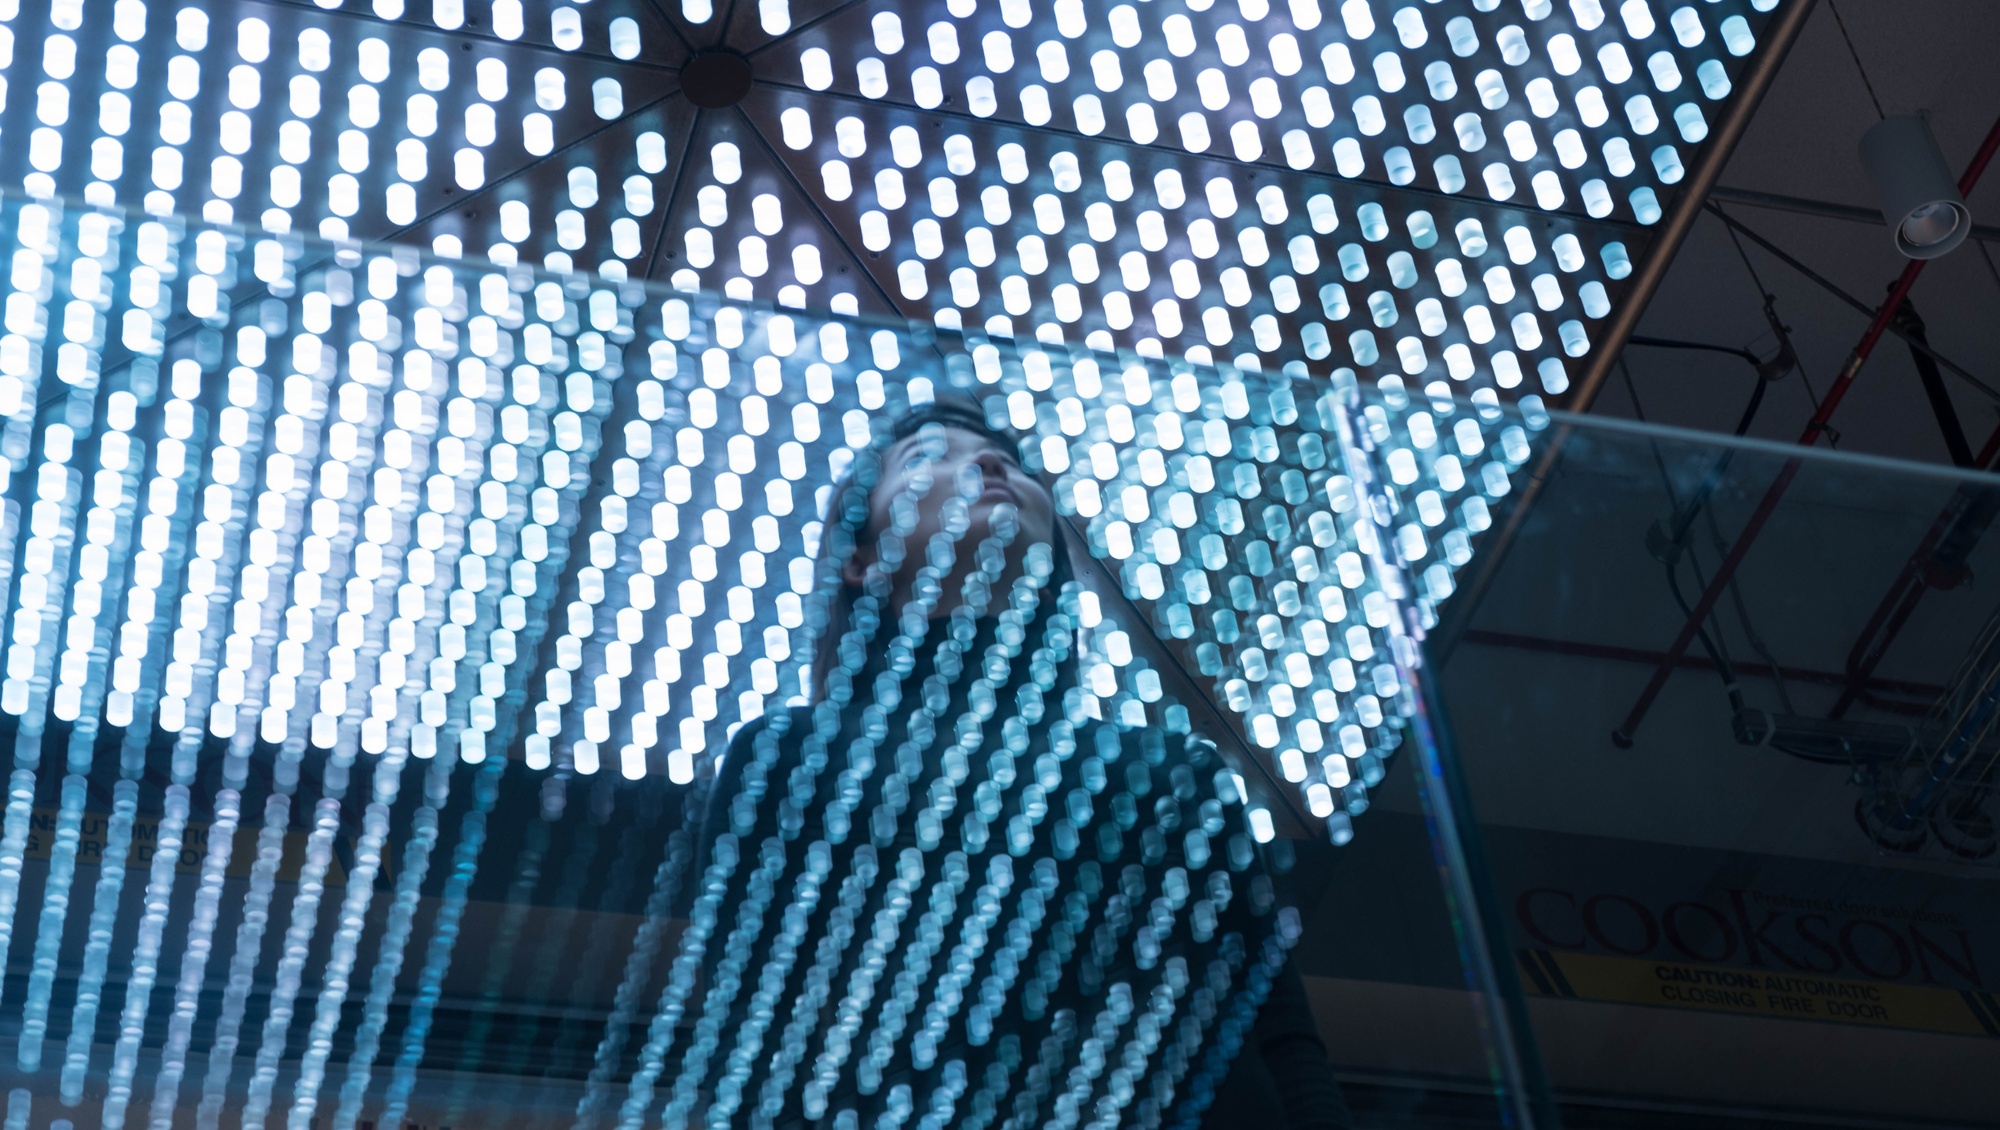 Woman looking up a illuminated surface made of many tiny lights in a grid pattern